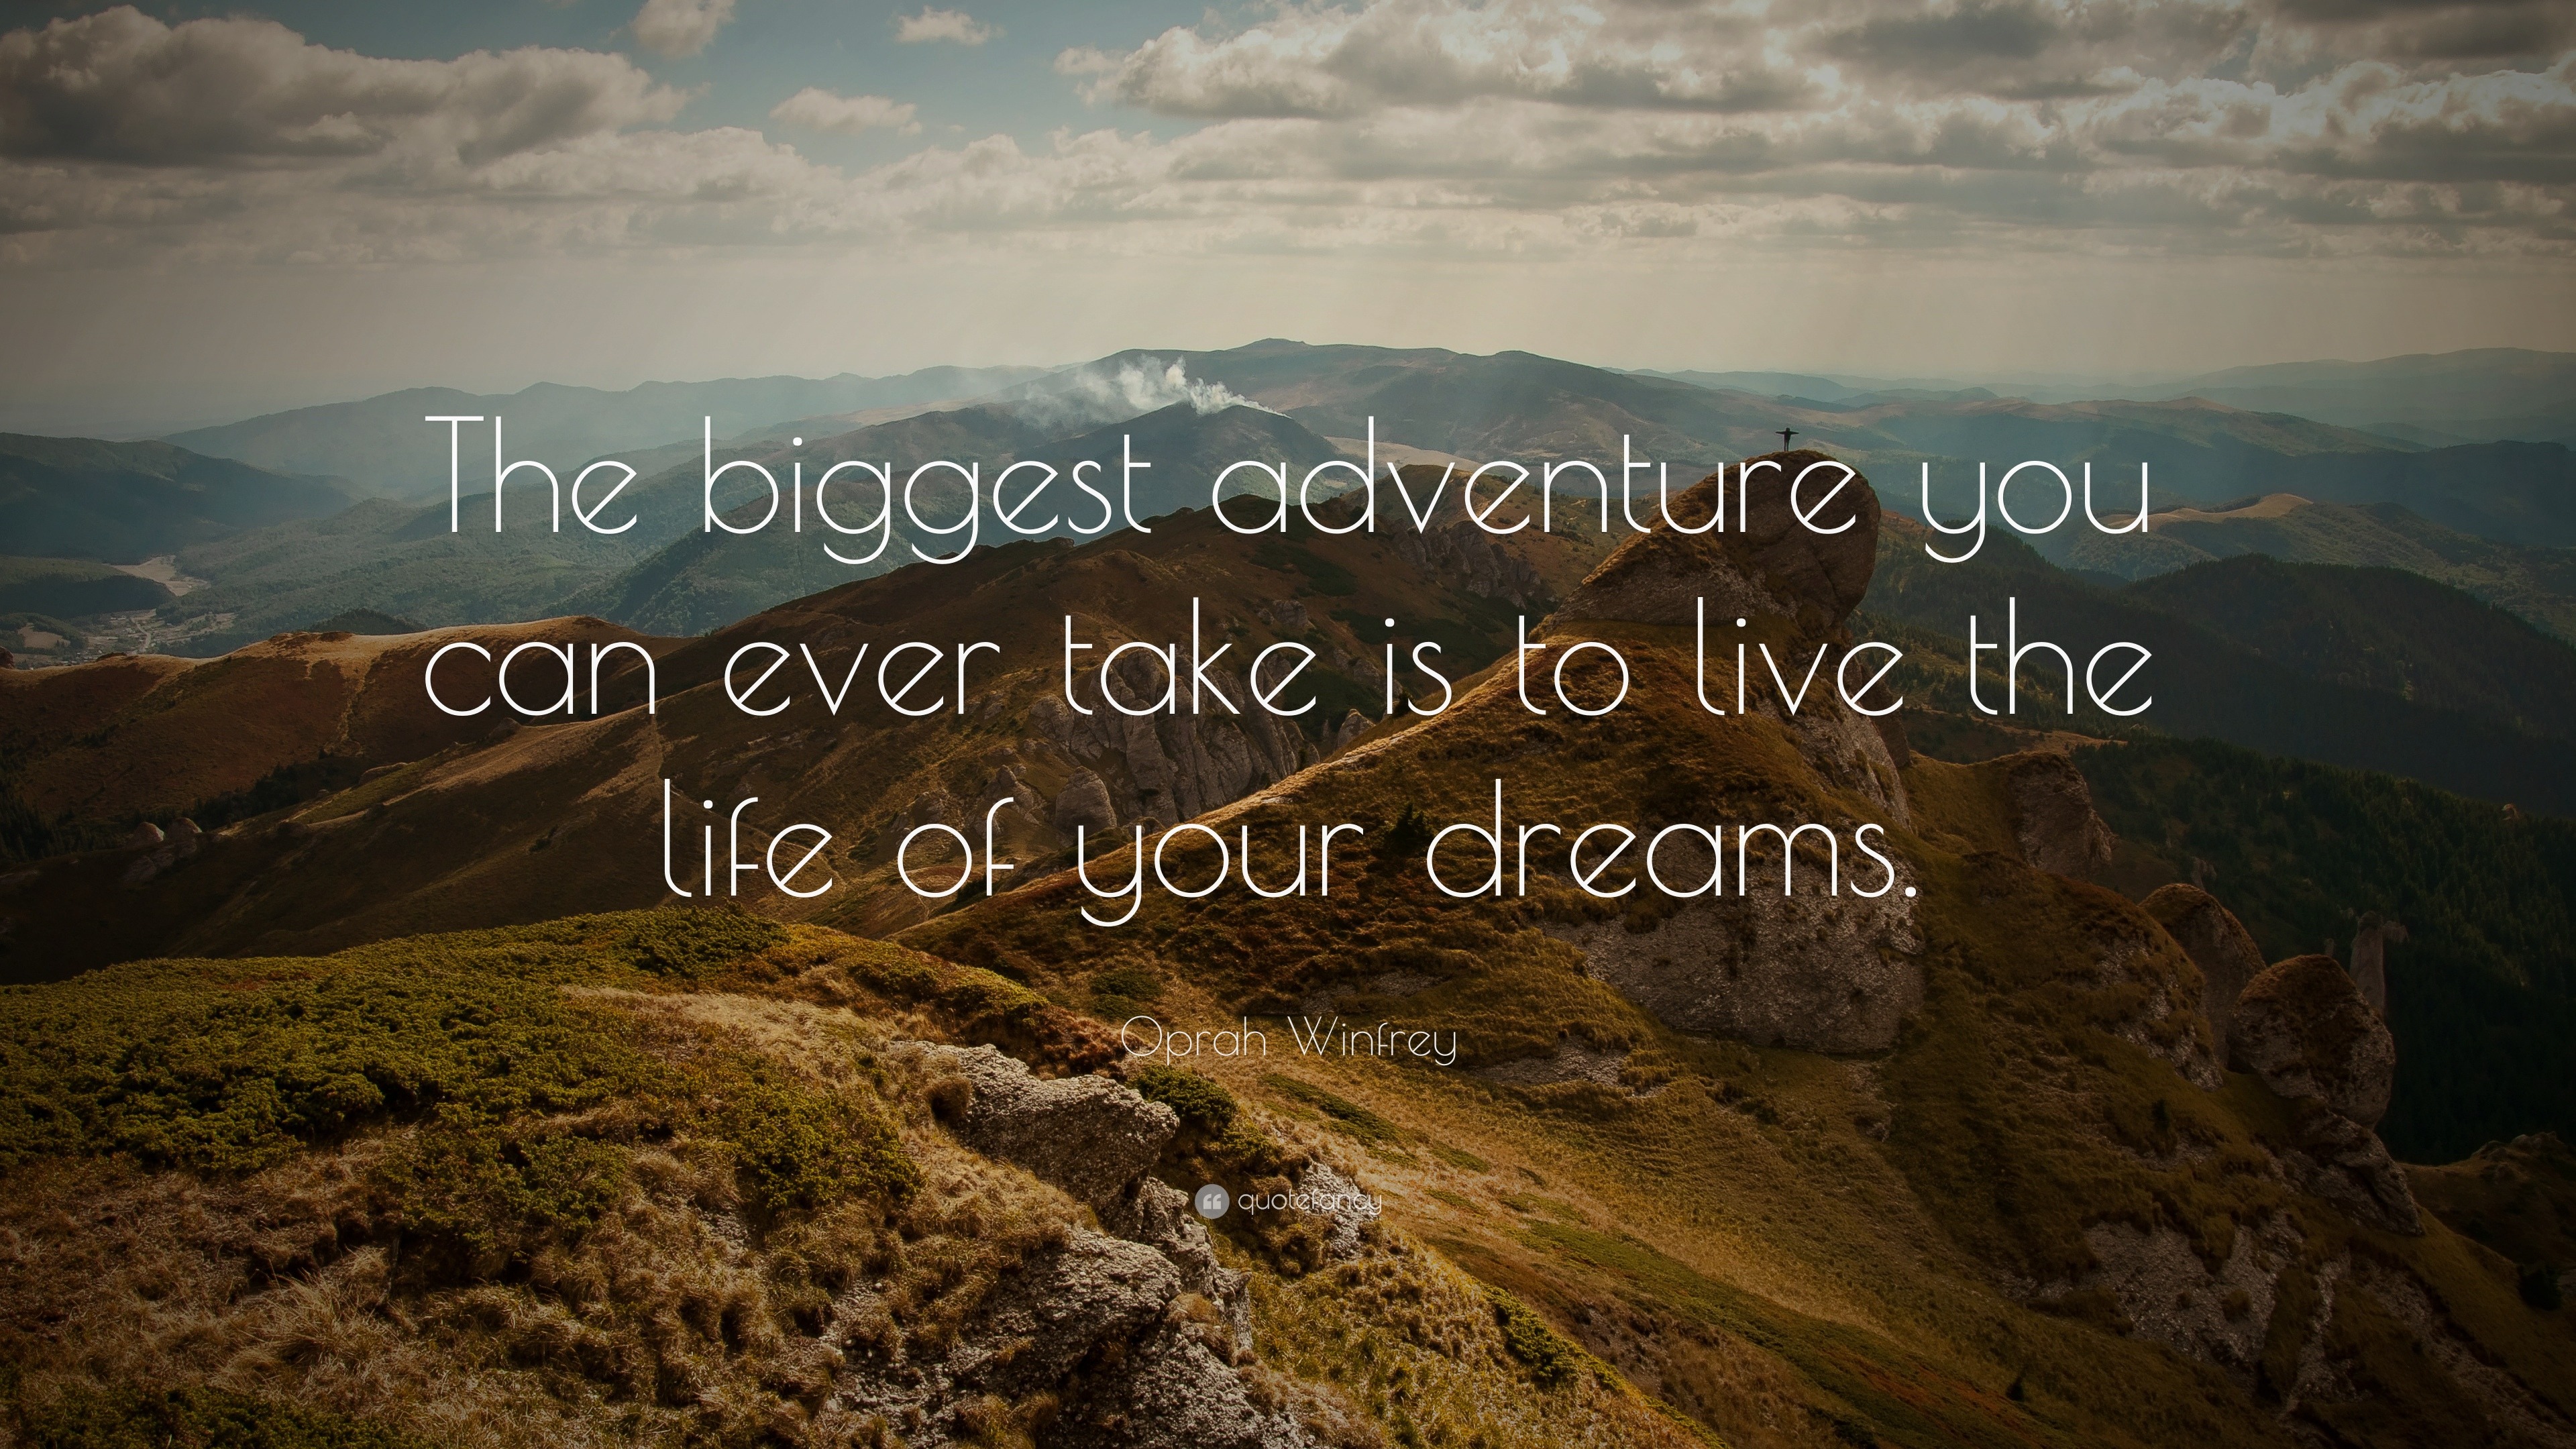 Travel Quotes (40 wallpapers) - Quotefancy